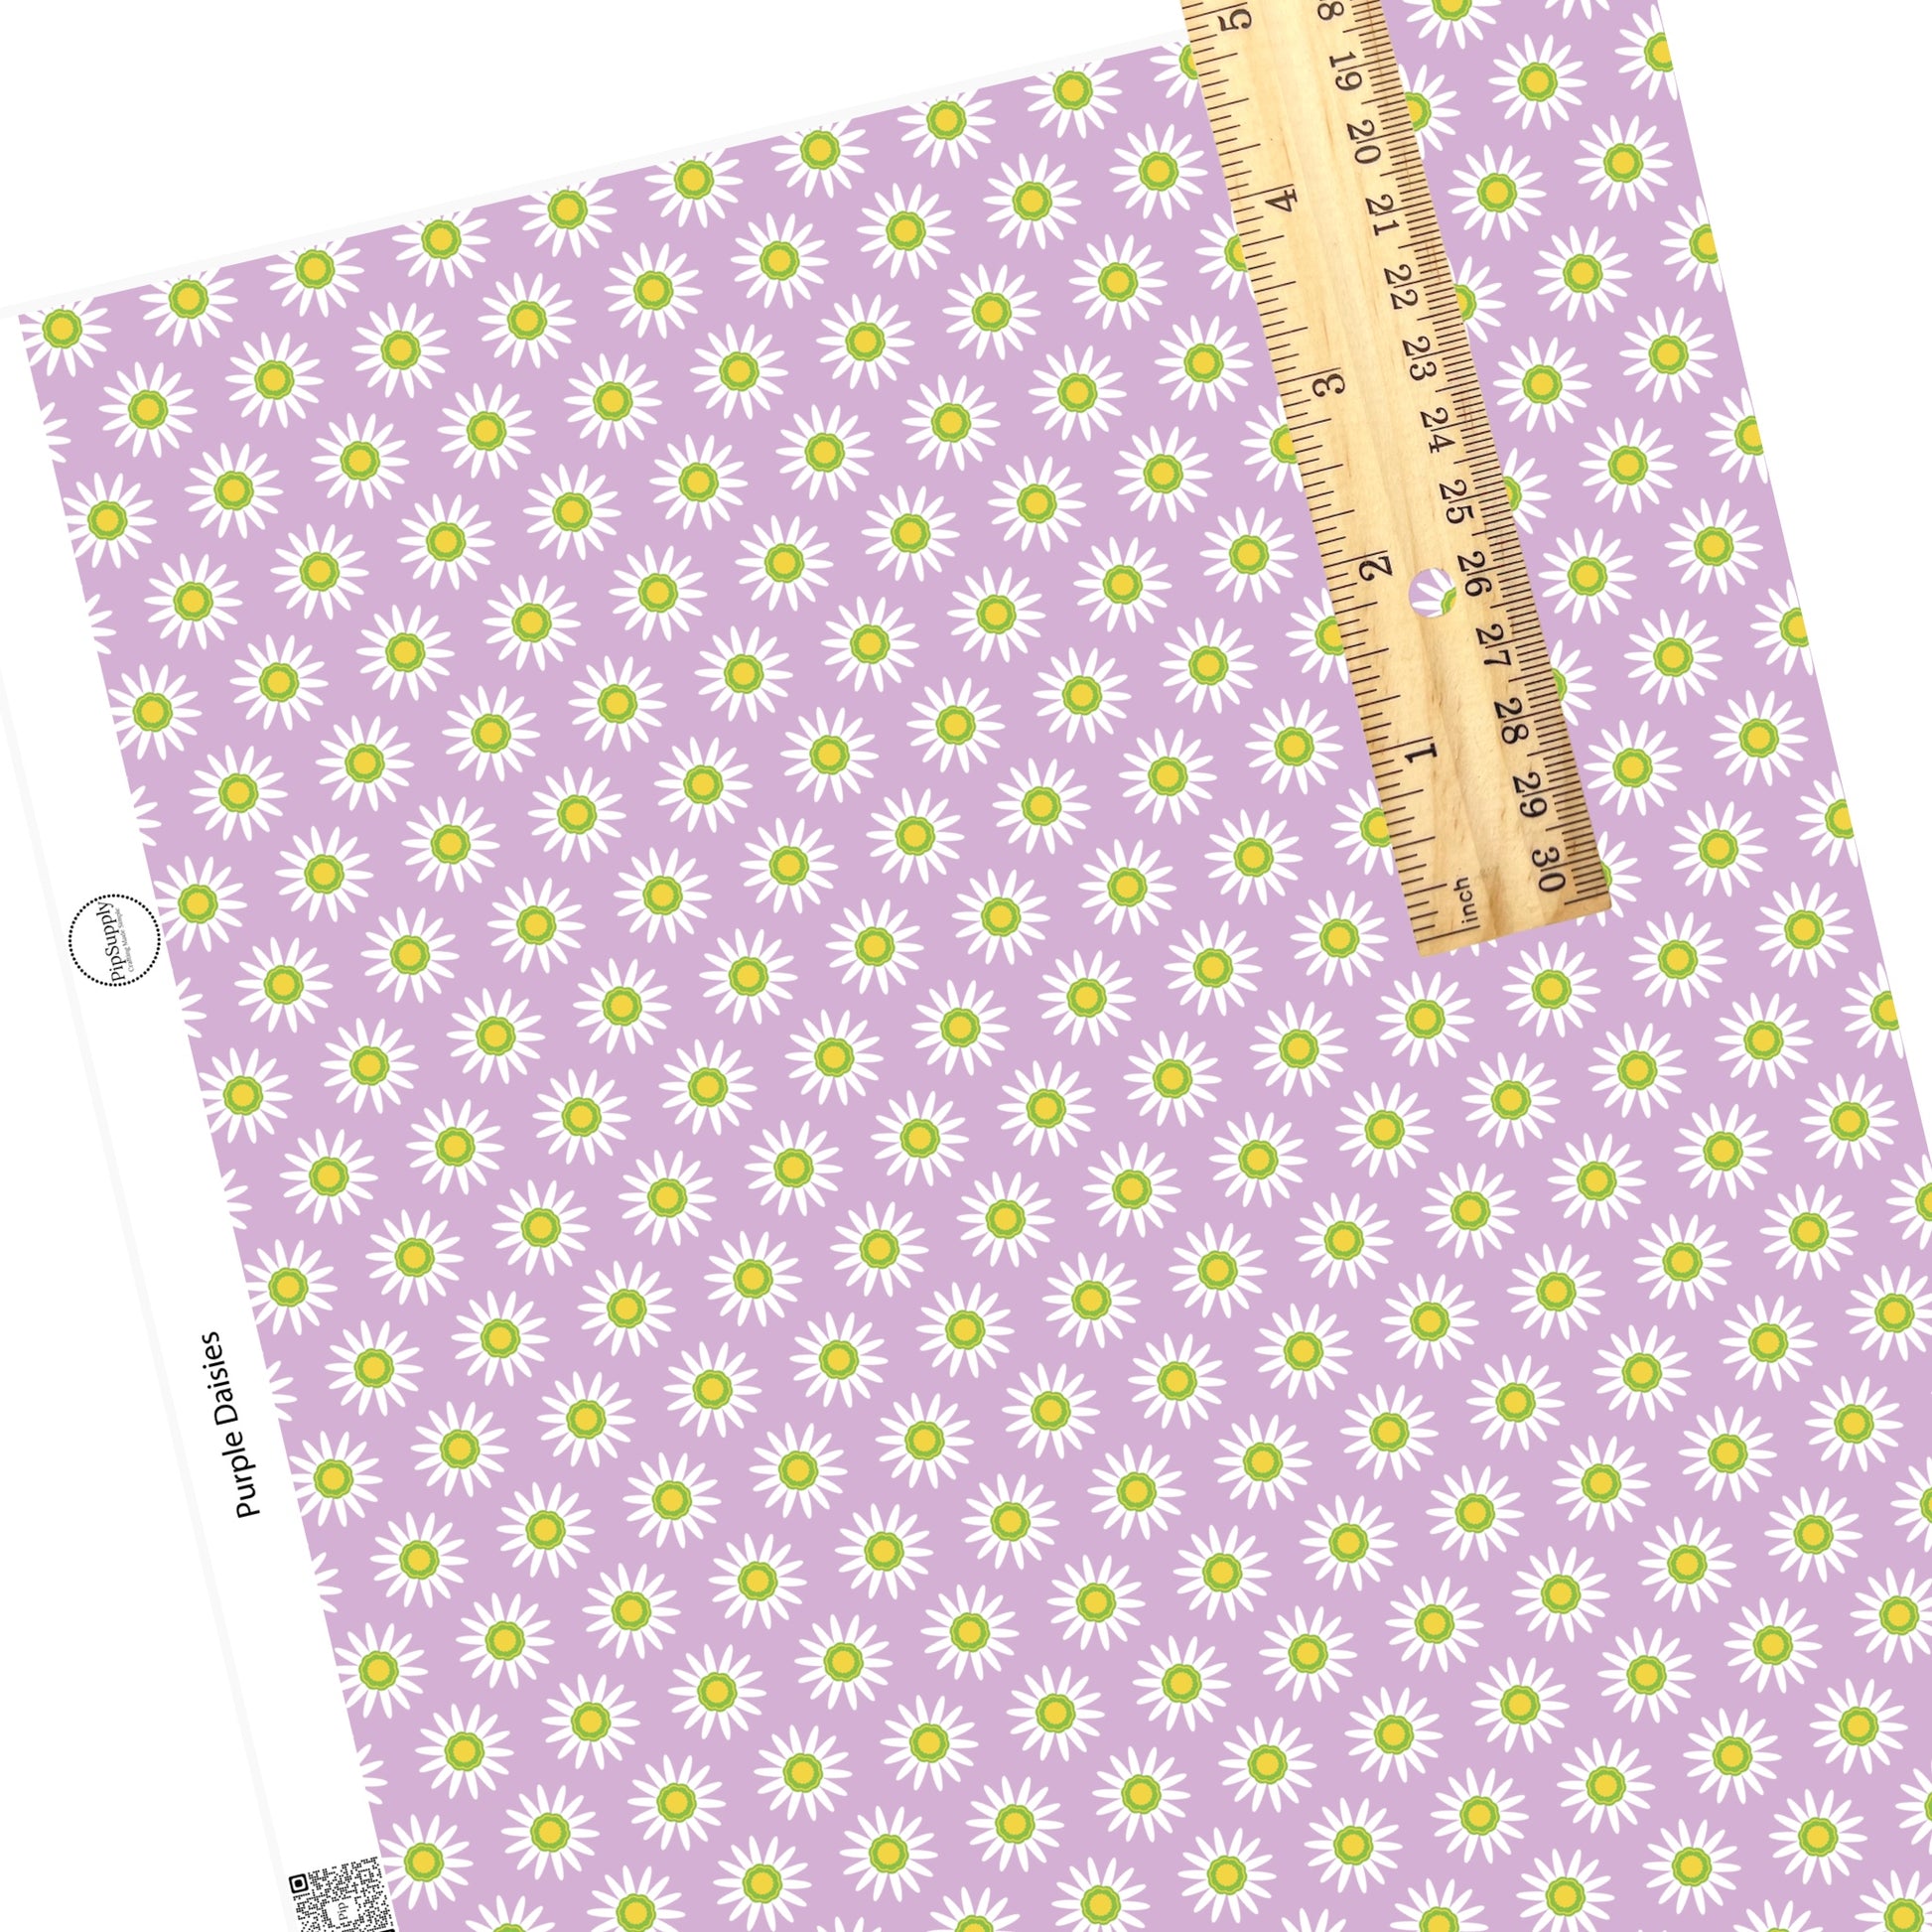 White flowers with yellow center on purple faux leather sheets